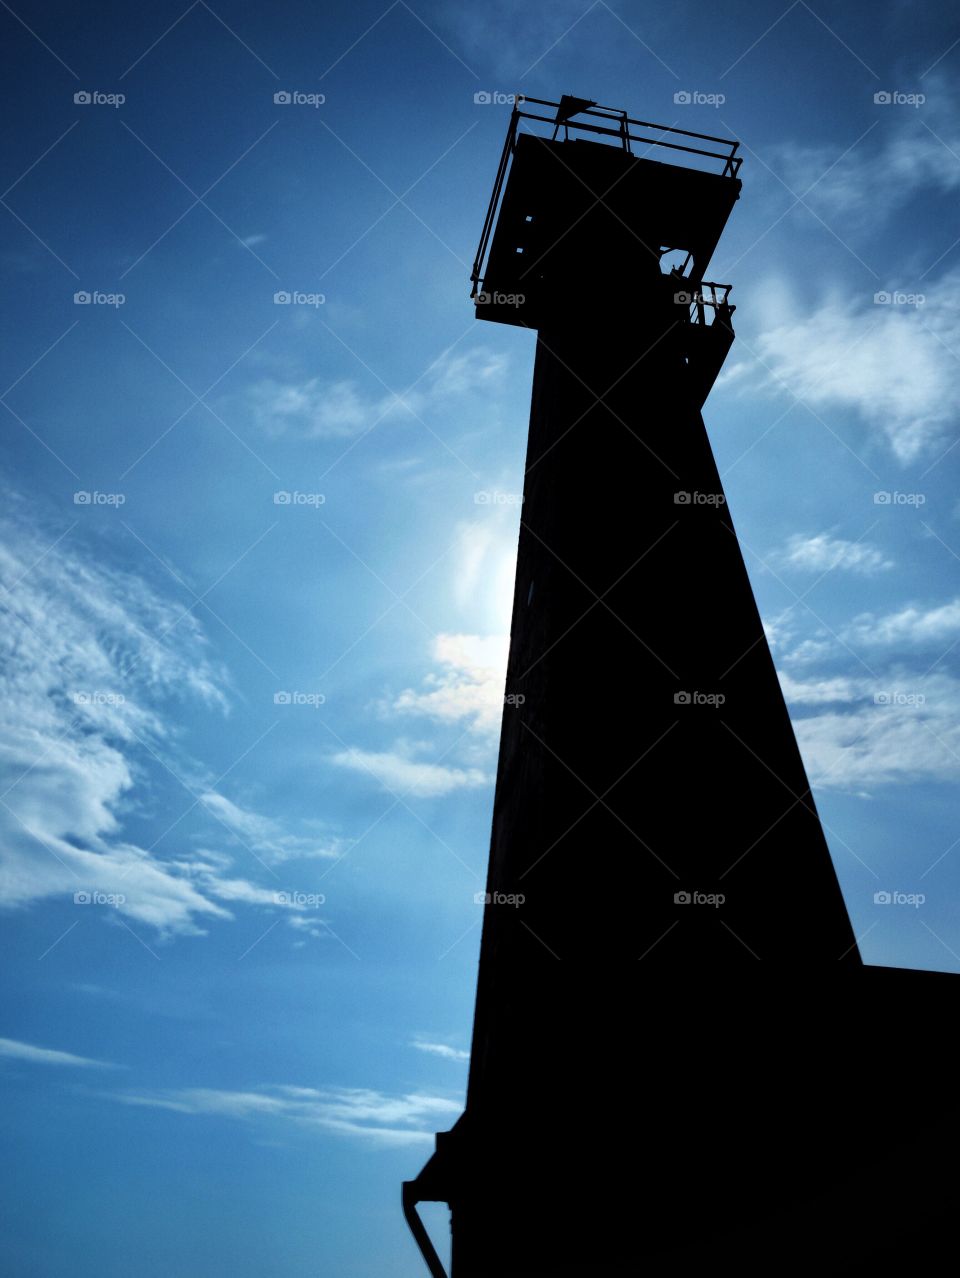 Lighthouse at Pere Marquette; Muskegon, Michigan, May 17, 2015. | Muskegon South Pierhead Lighthouse